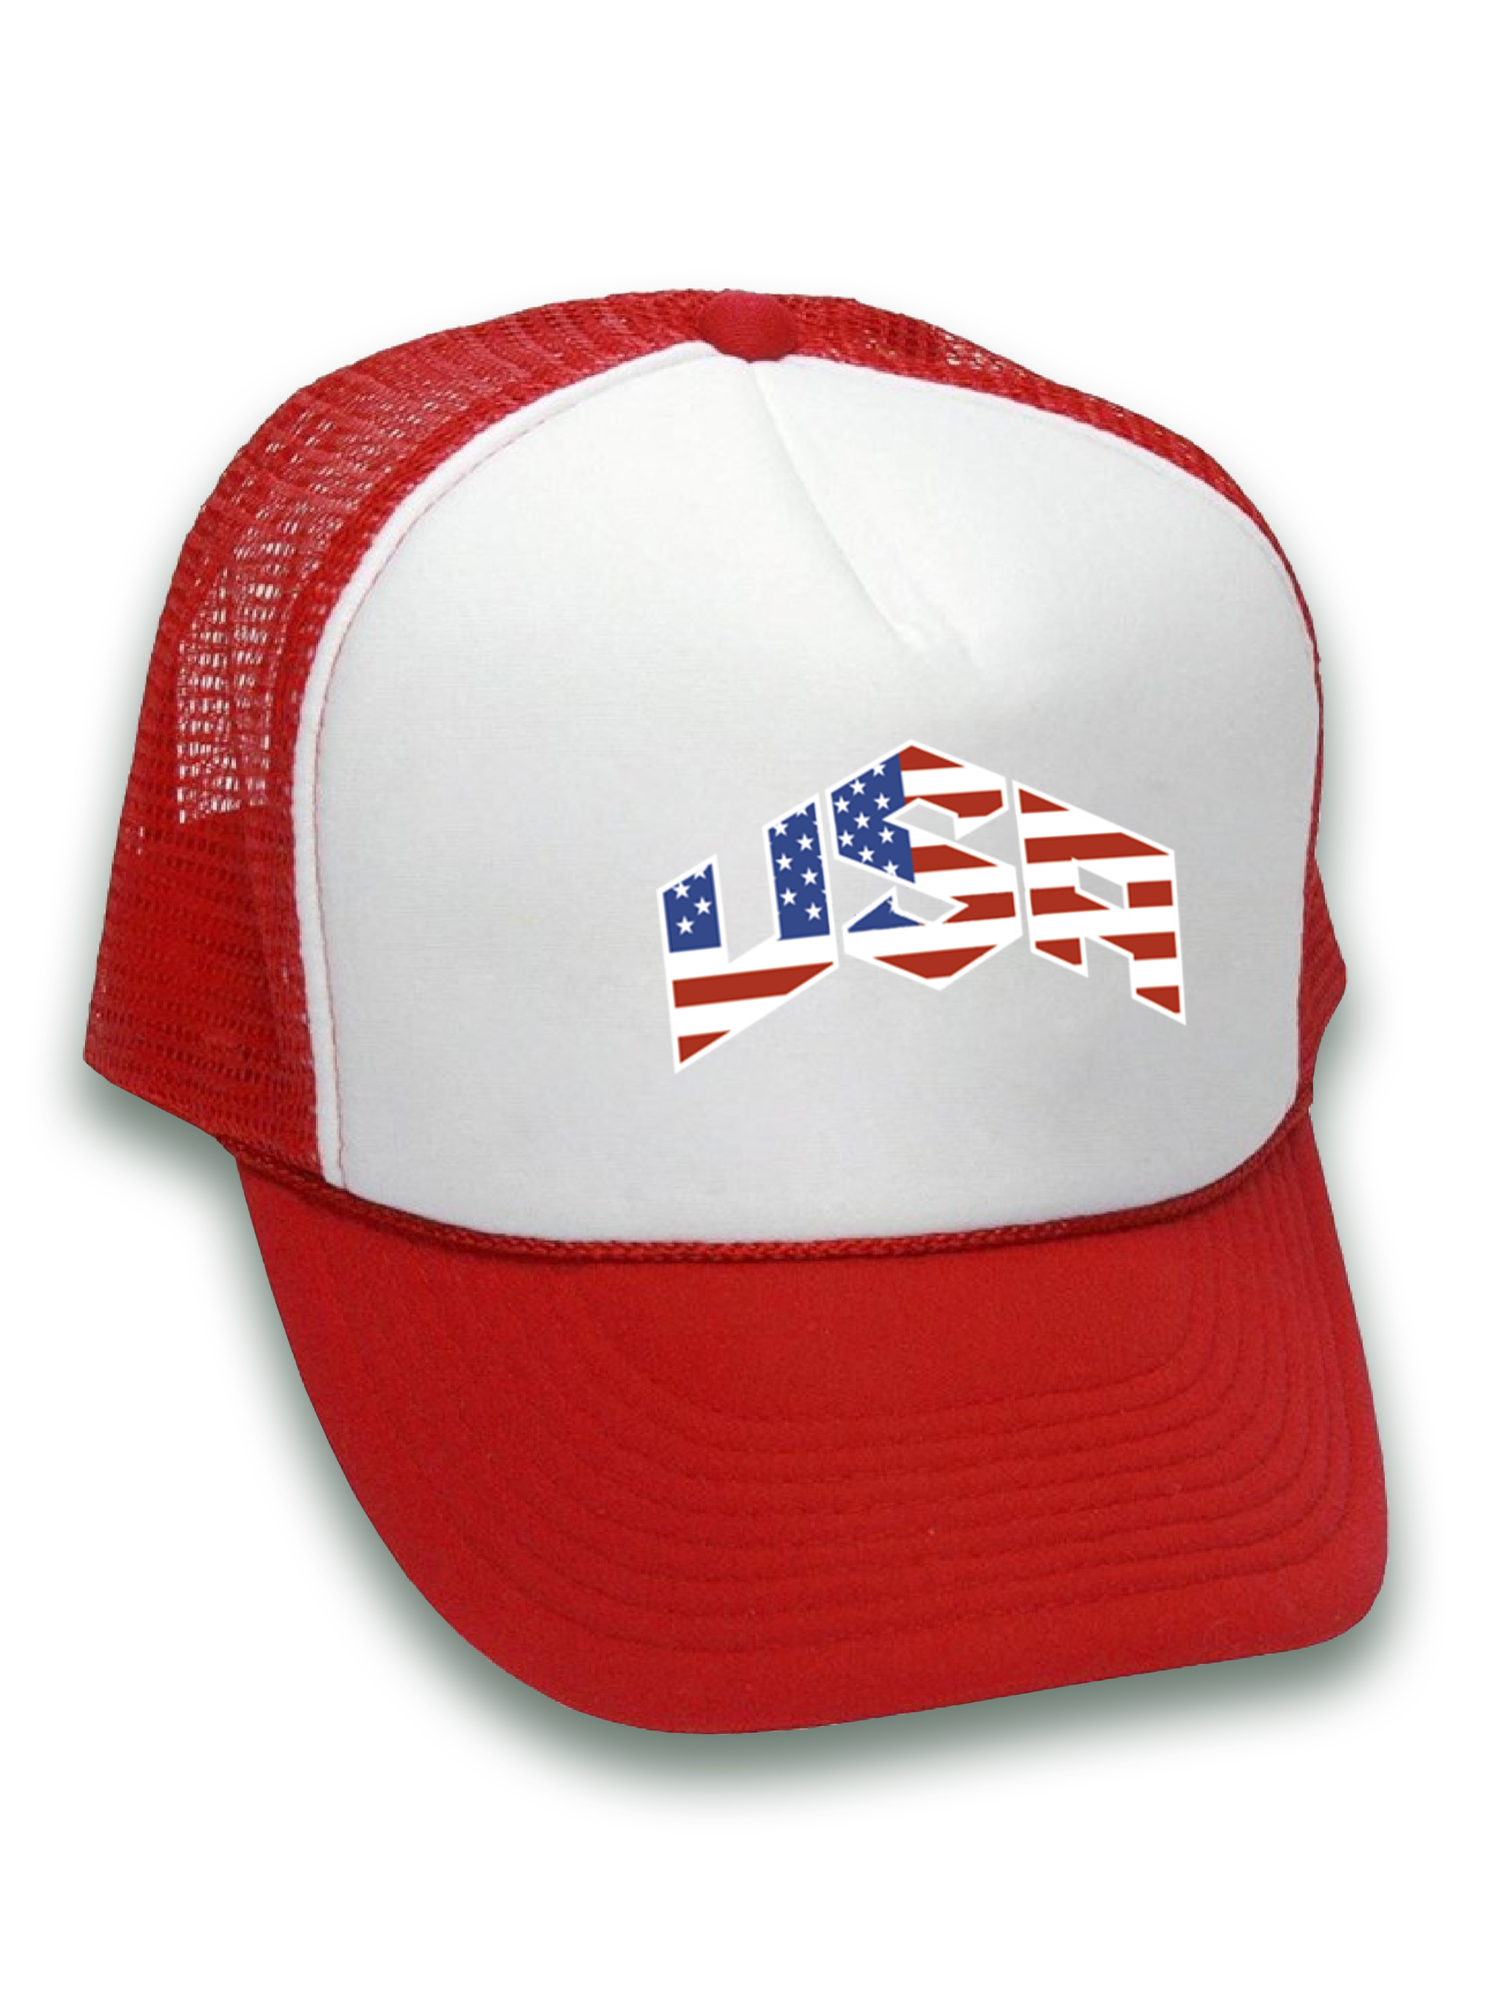 Awkward Styles USA Hat American Flag Trucker Hat for Women Men Patriotic Gifts American Flag Hat USA Baseball Cap Patriotic Hat American Flag Men Women 4th of July Hat 4th of July Accessories - image 2 of 6